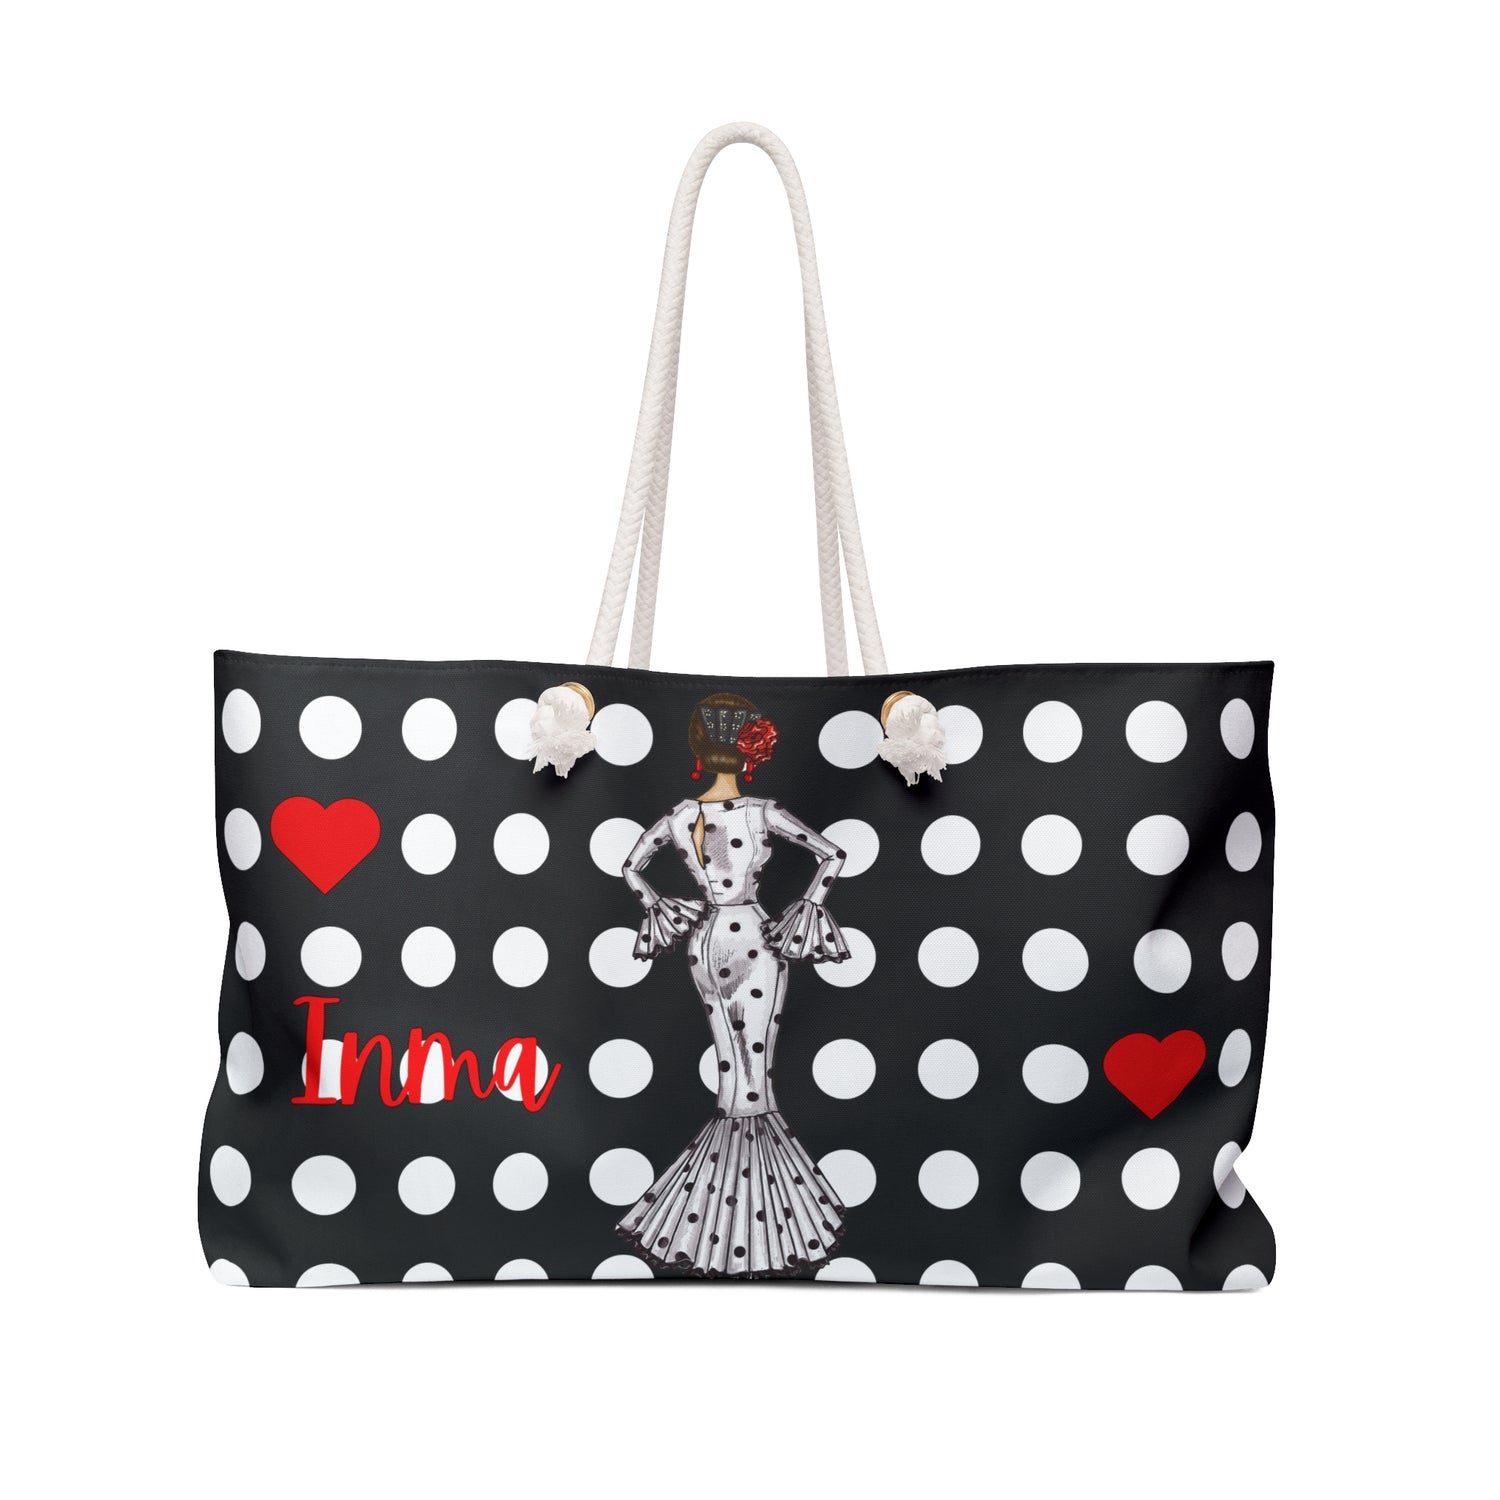 a black and white polka dot bag with a lady on it